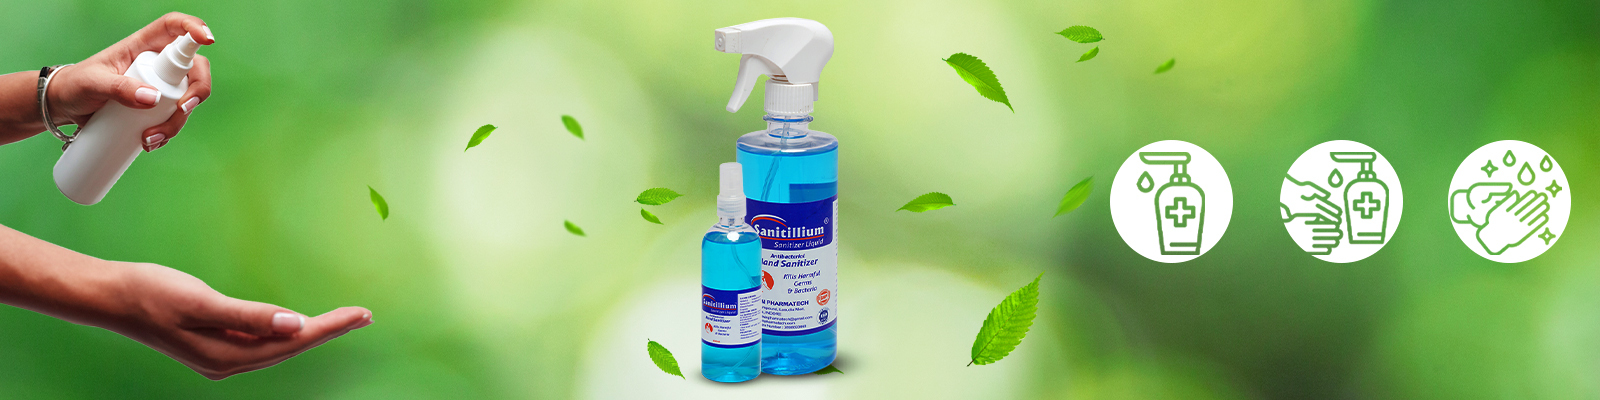 Hand Sanitizer - The Fastest Method for Germ-Free Skin